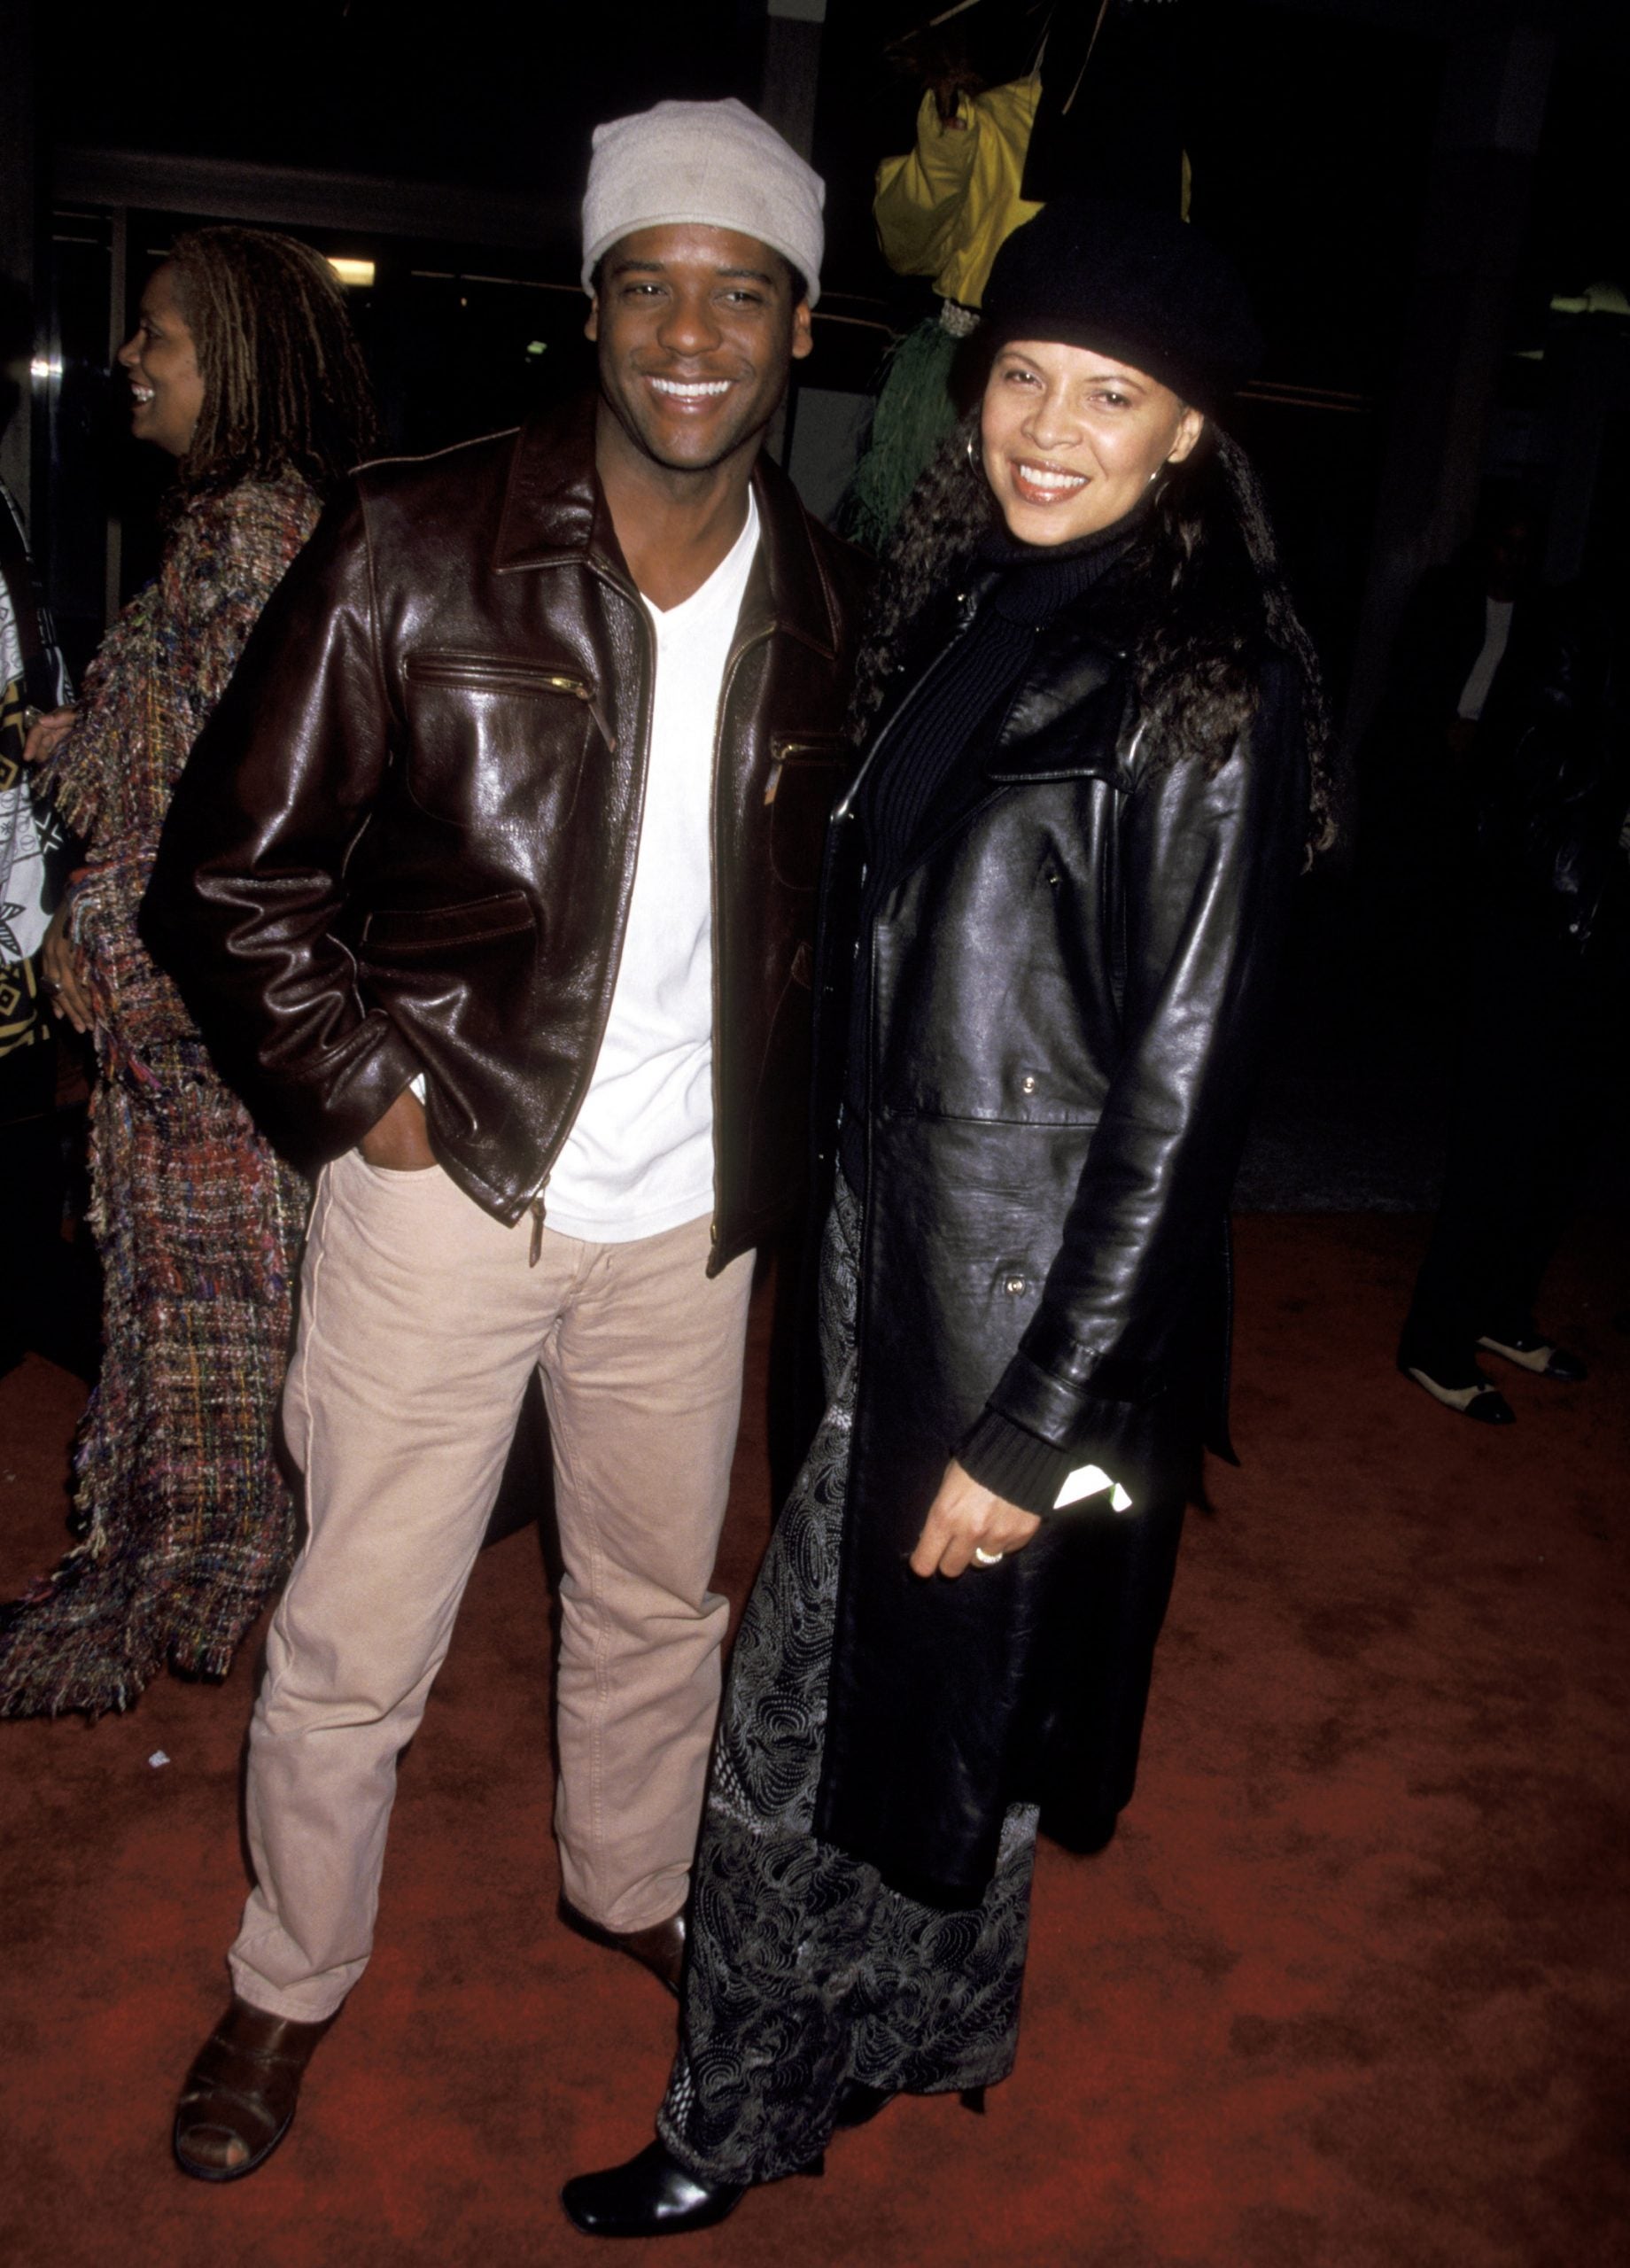 Blair Underwood and Wife Desiree DaCosta Are Divorcing After 27 Years Of Marriage